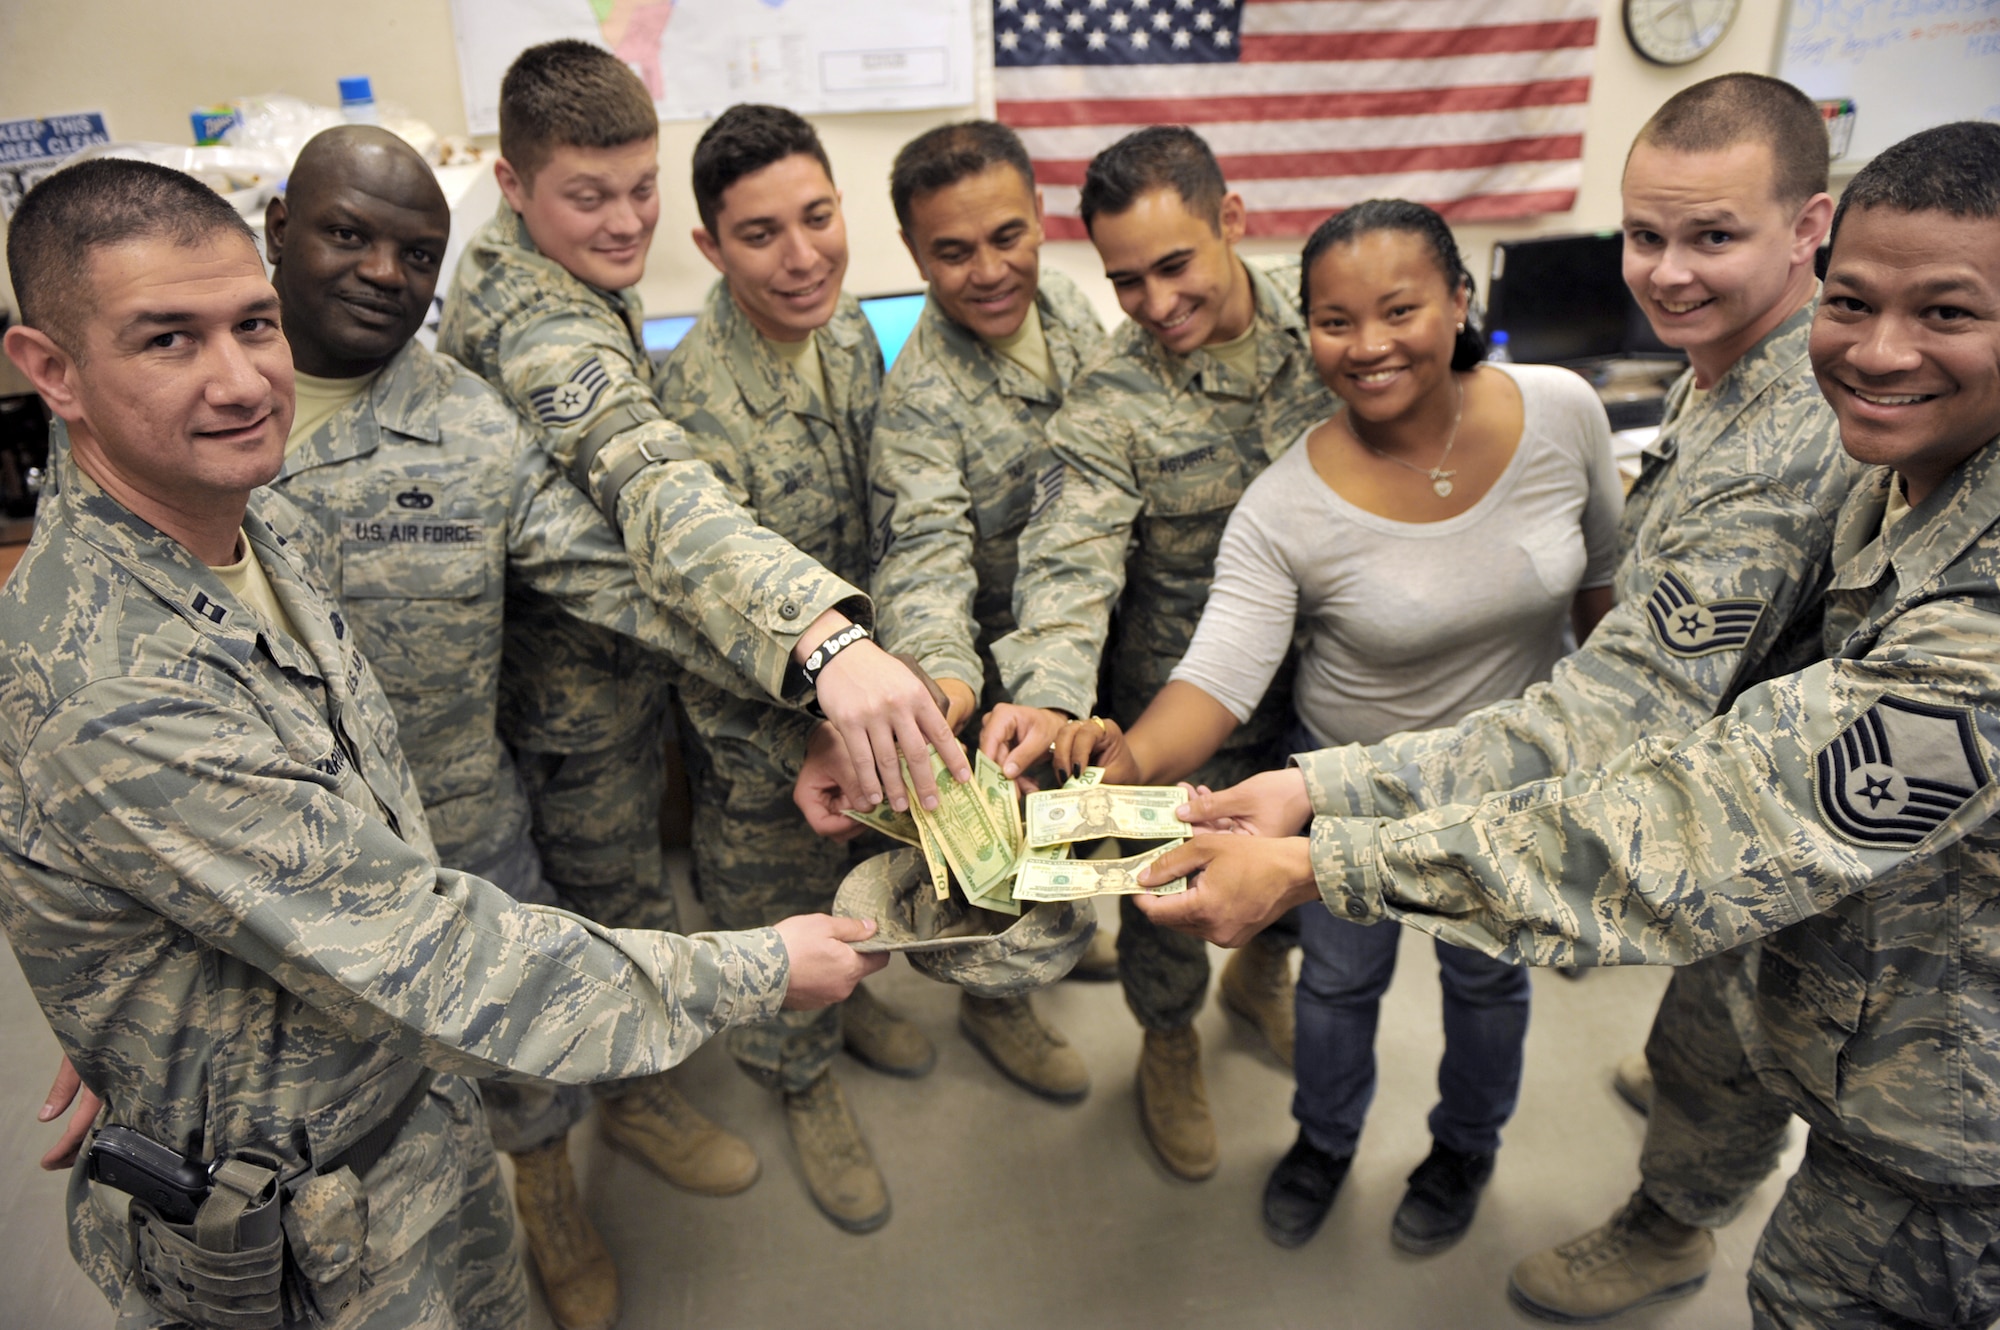 Members from the 455th Expeditionary Aerial Port Squadron and 455th Expeditionary Logistics Readiness Squadron collected monetary donations to replace money stolen from three girls in Georgia. (U.S. Air Force photo/Senior Airman Sheila deVera)